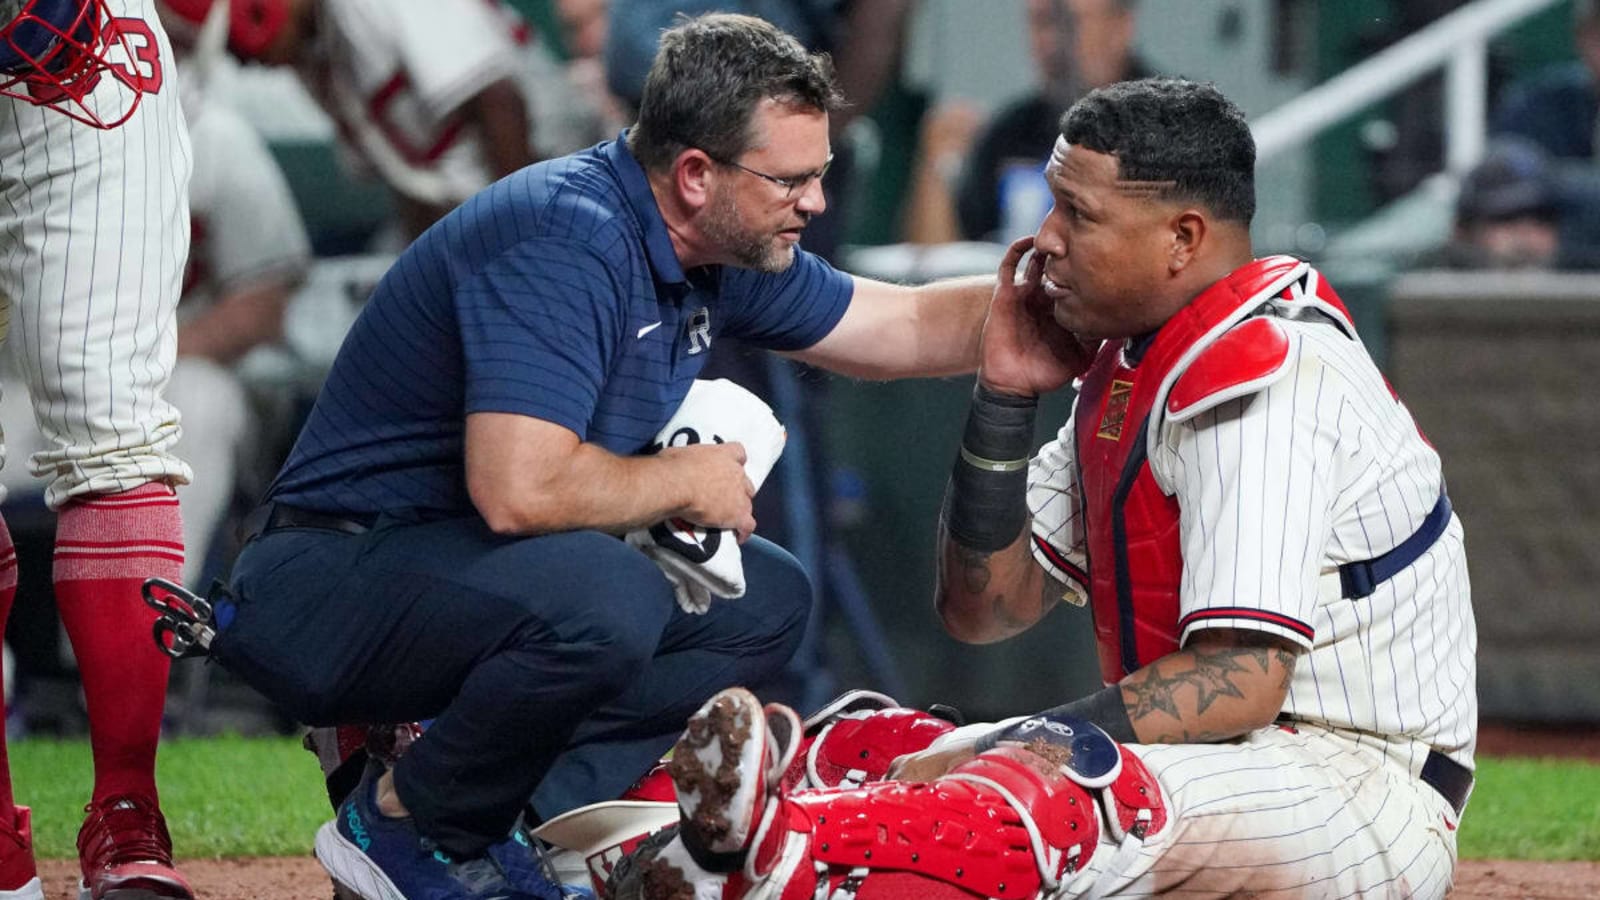 Kansas City Royals Place Catcher Salvador Perez on Injured List With Concussion